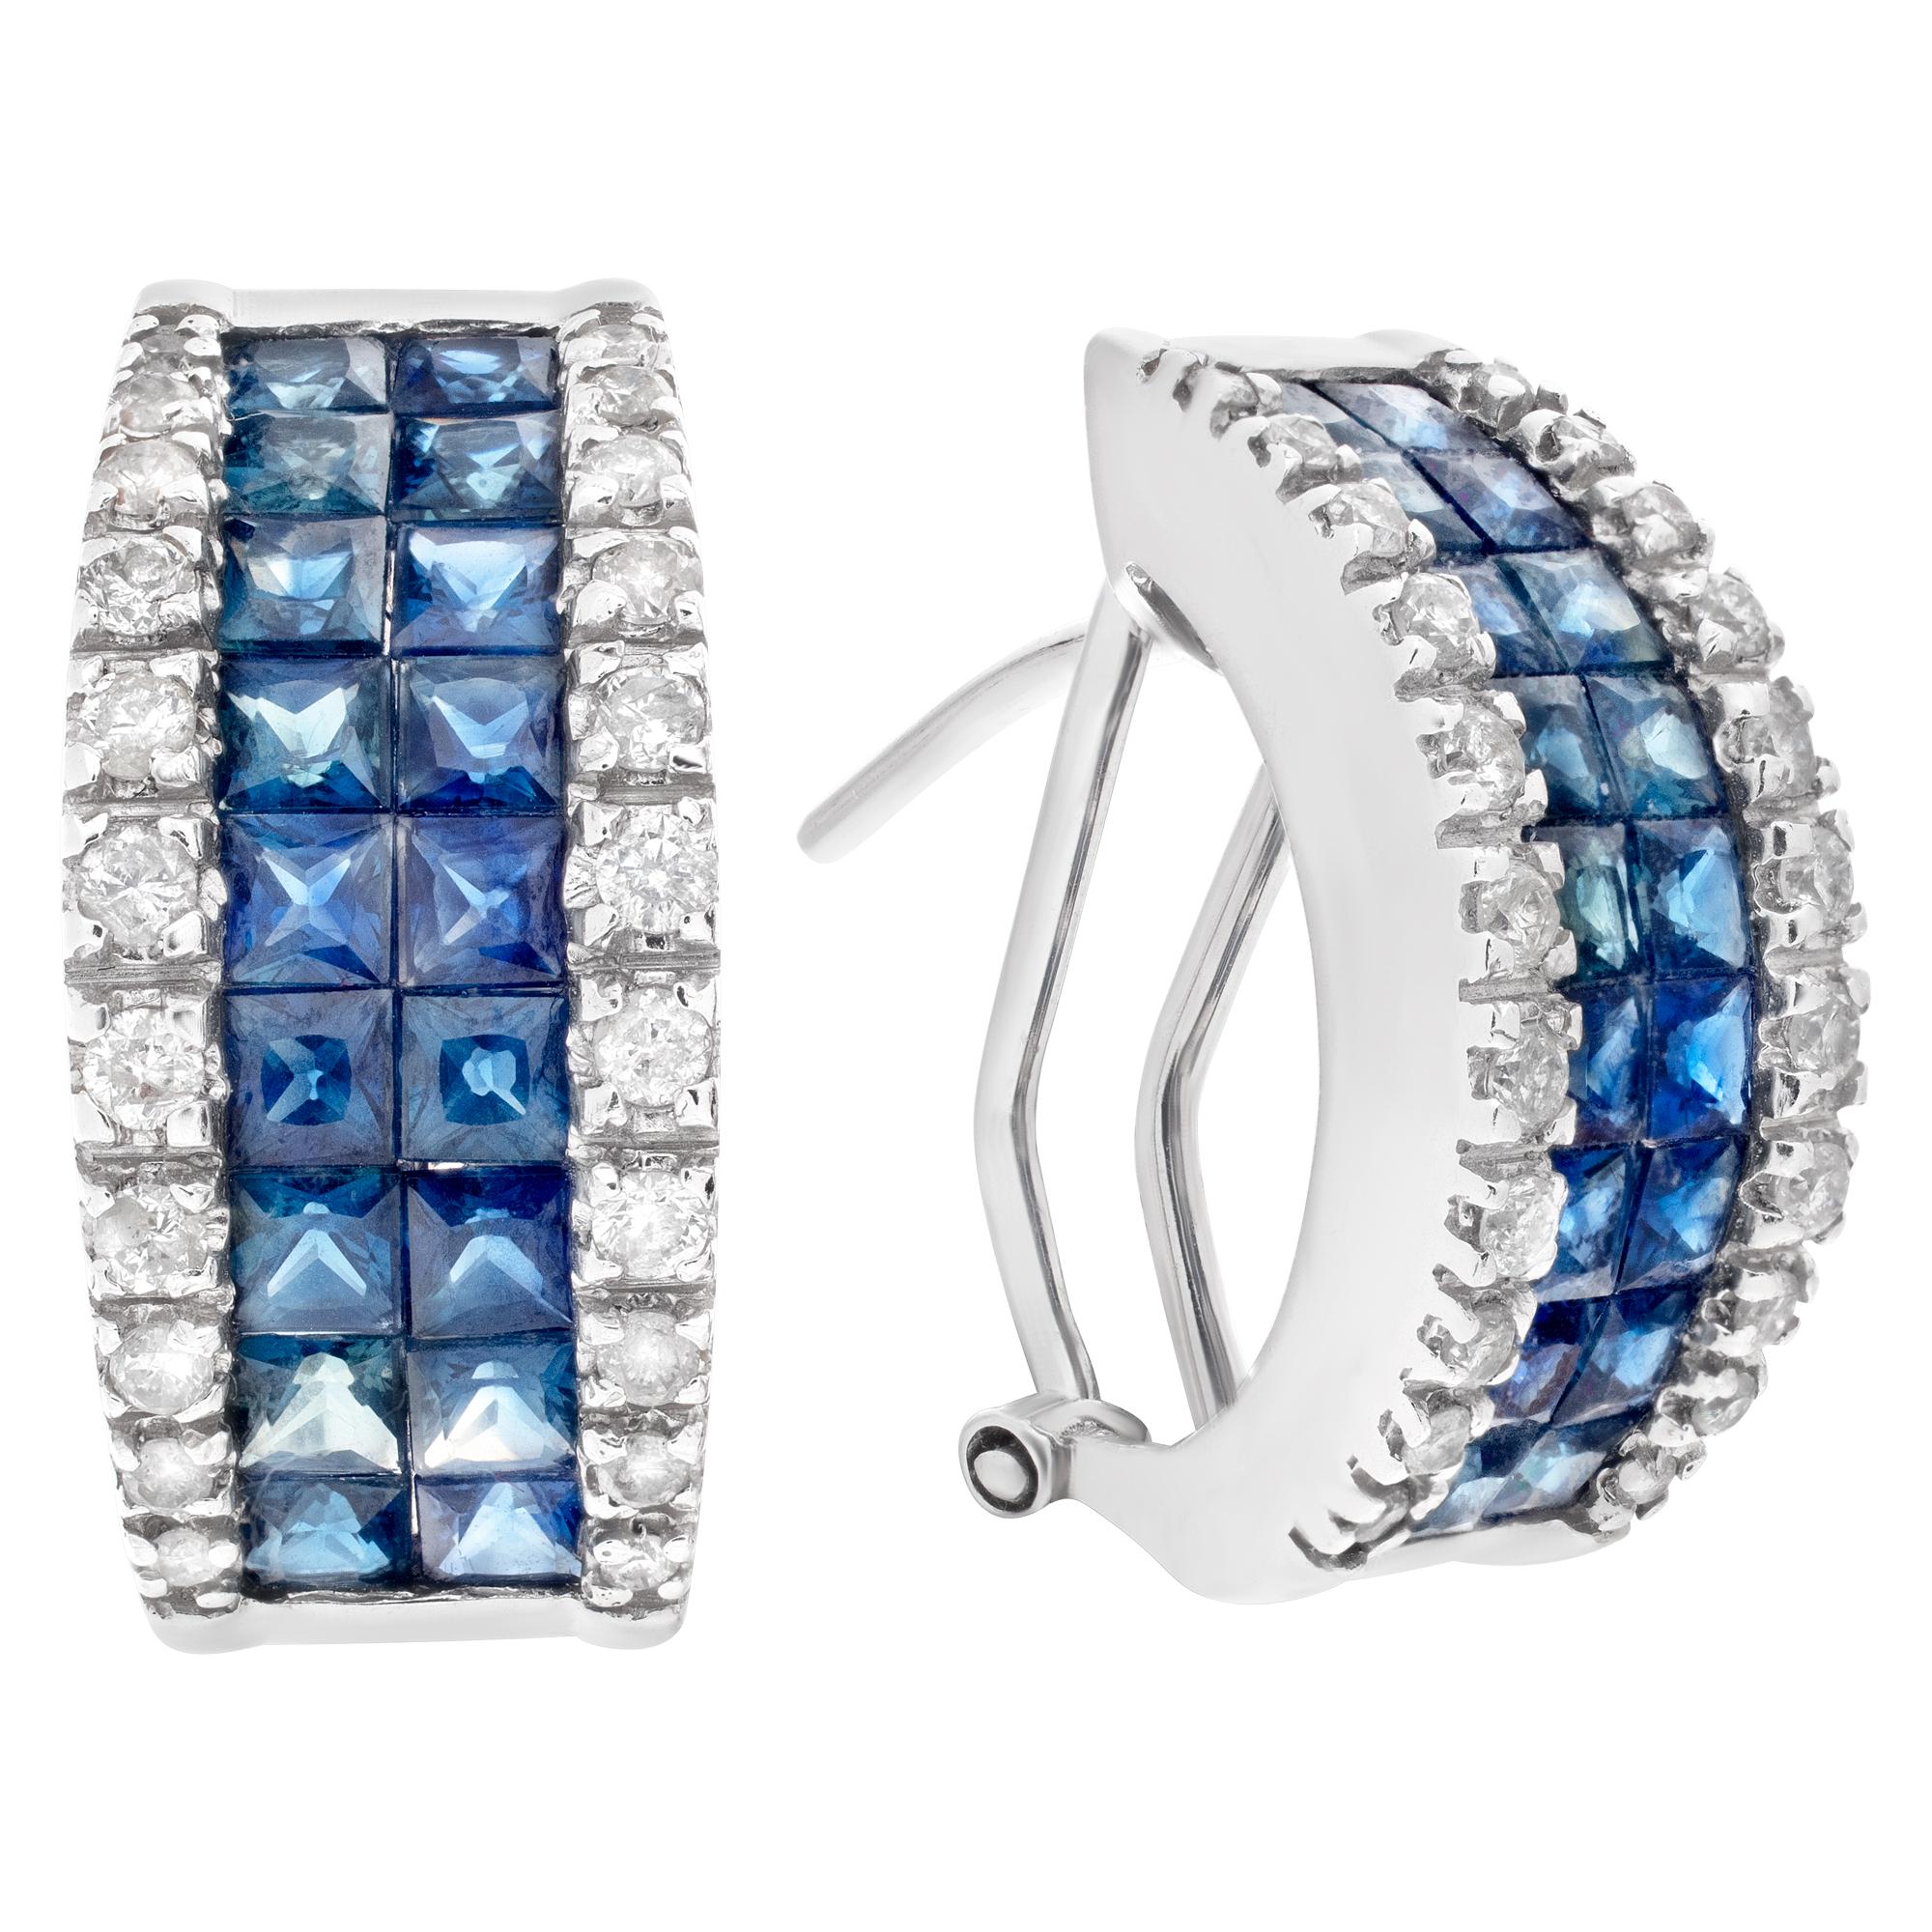 Sapphire and diamond hoops earrings set in 14k white gold. Round brilliant cut diamonds total approx. weight: 0.60 carat, estimate: G-H color, VS clarity. Invisible set princess cut Sapphire total approx weight: 2.88 carats. Measurments: 0.75 inches